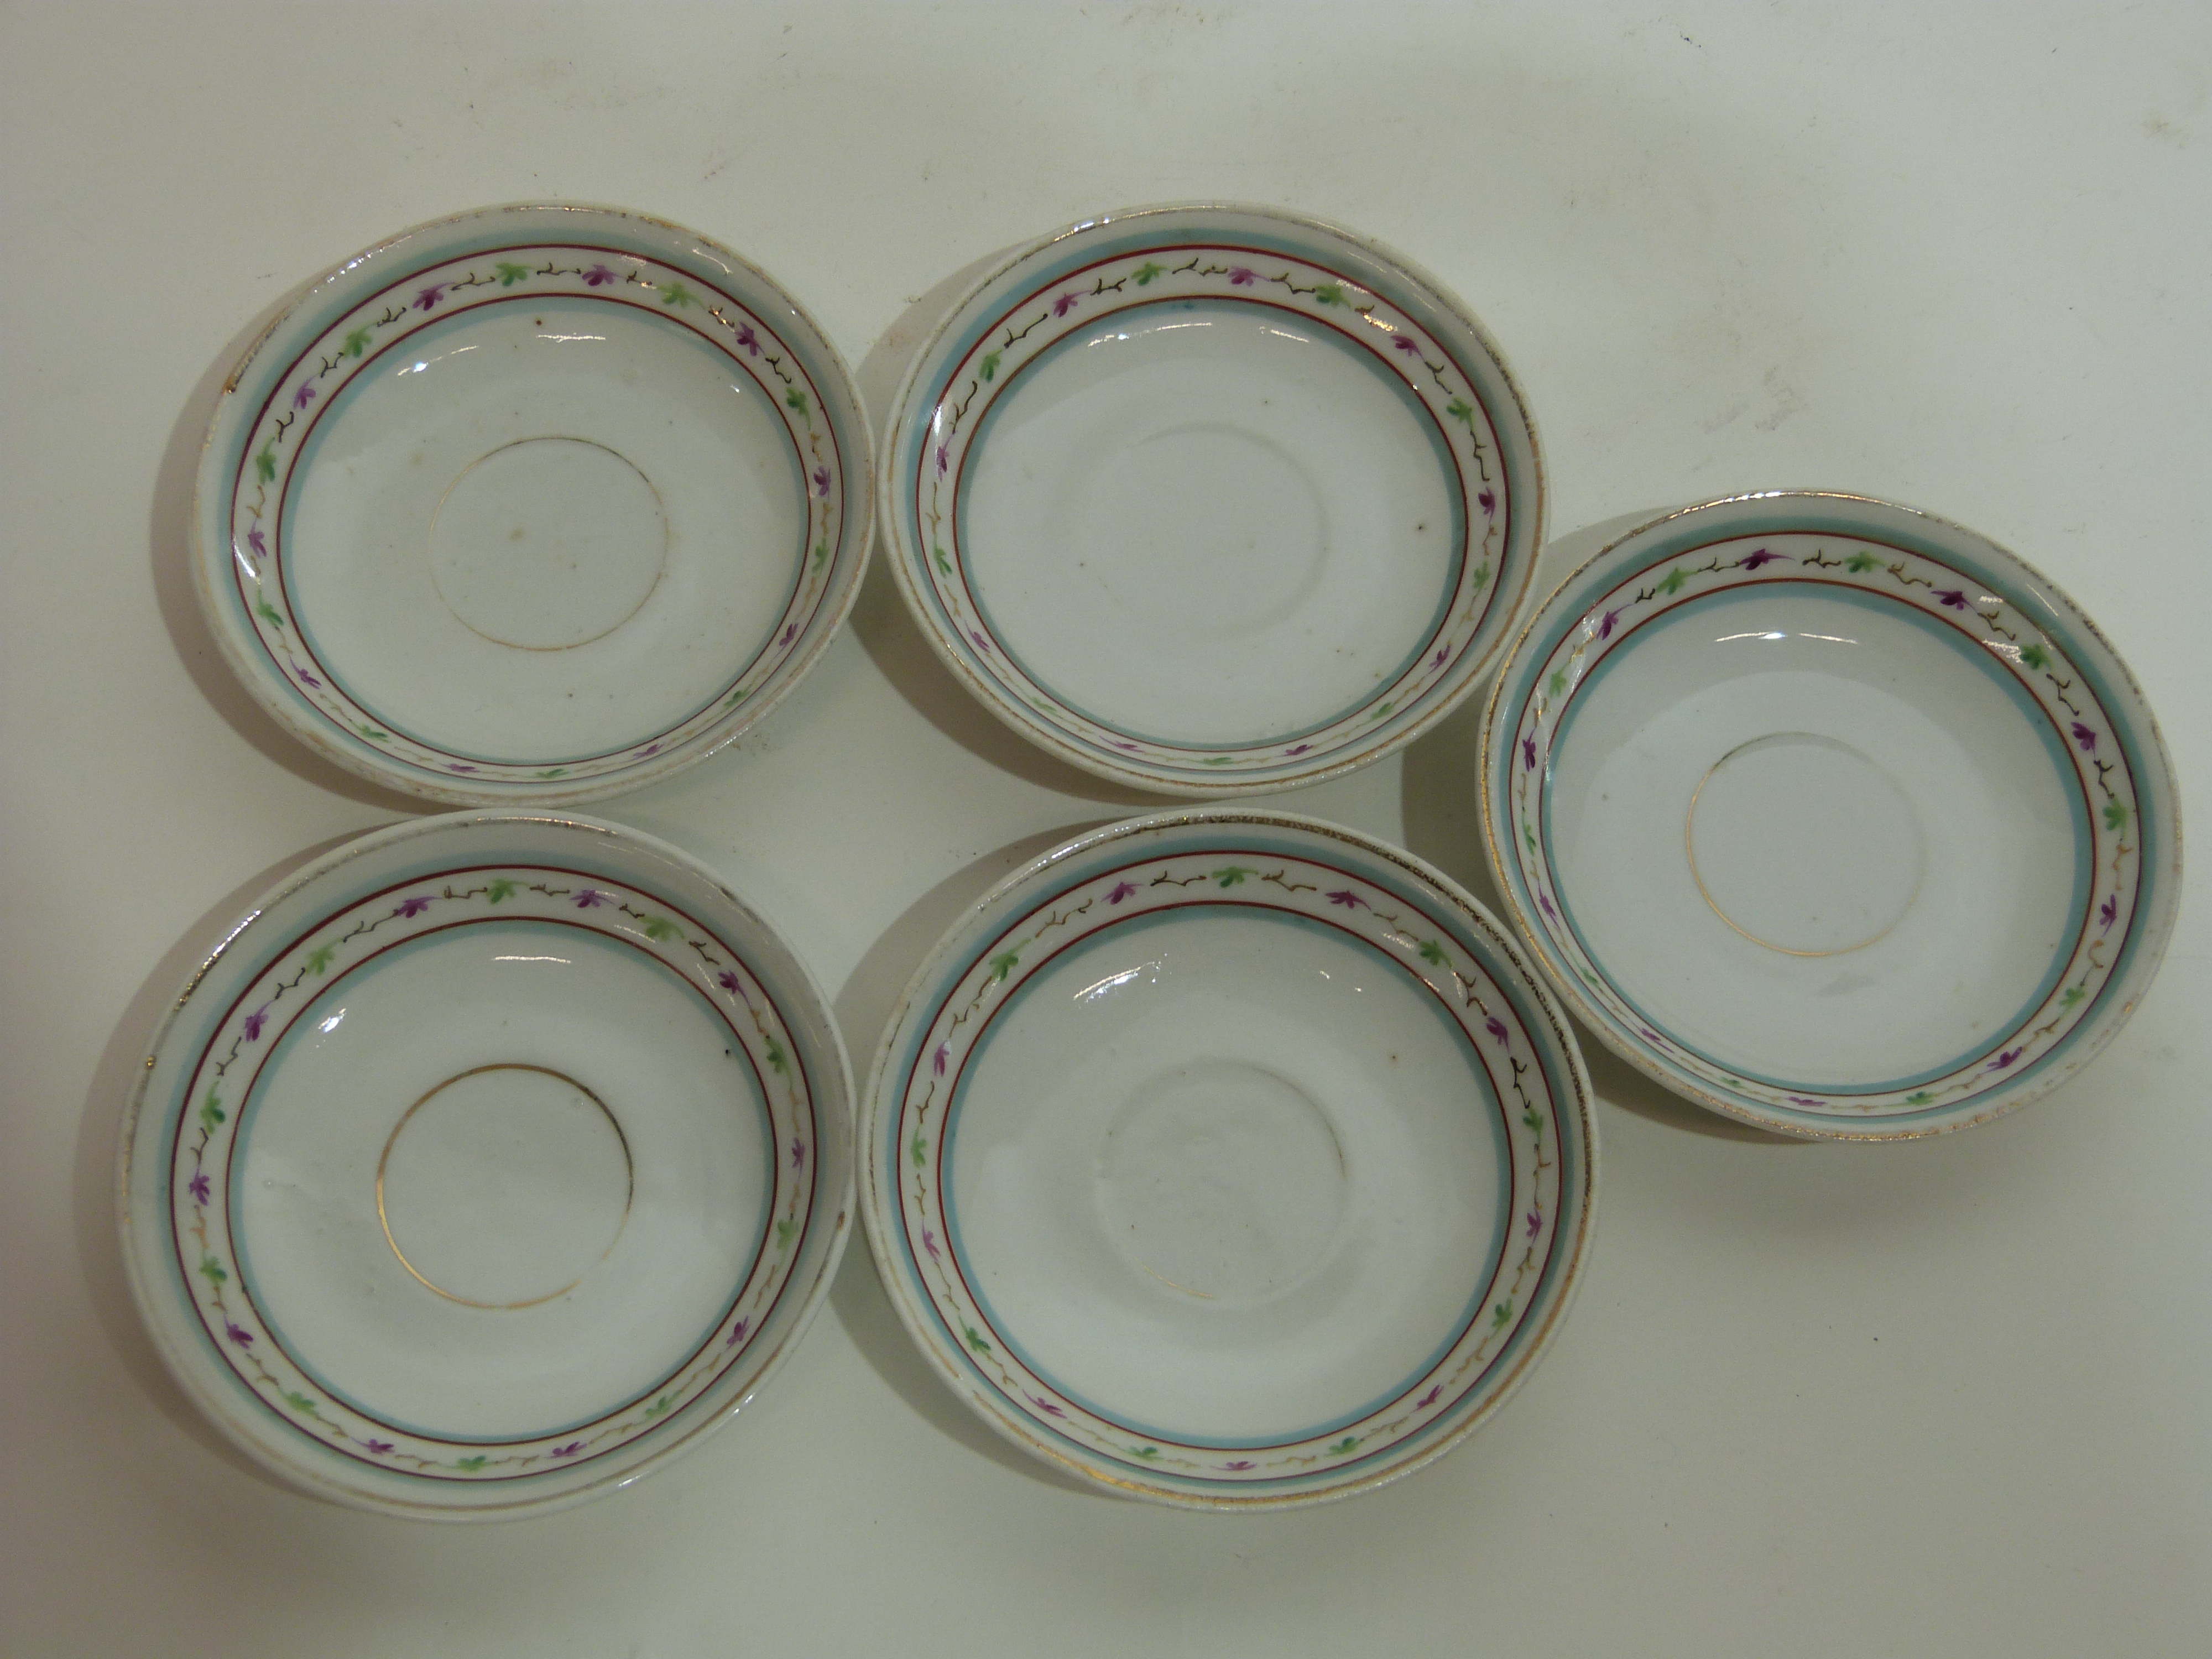 Miniature 19th century child's tea set comprising tea pot, sugar bowl and three cups and saucers - Image 2 of 4